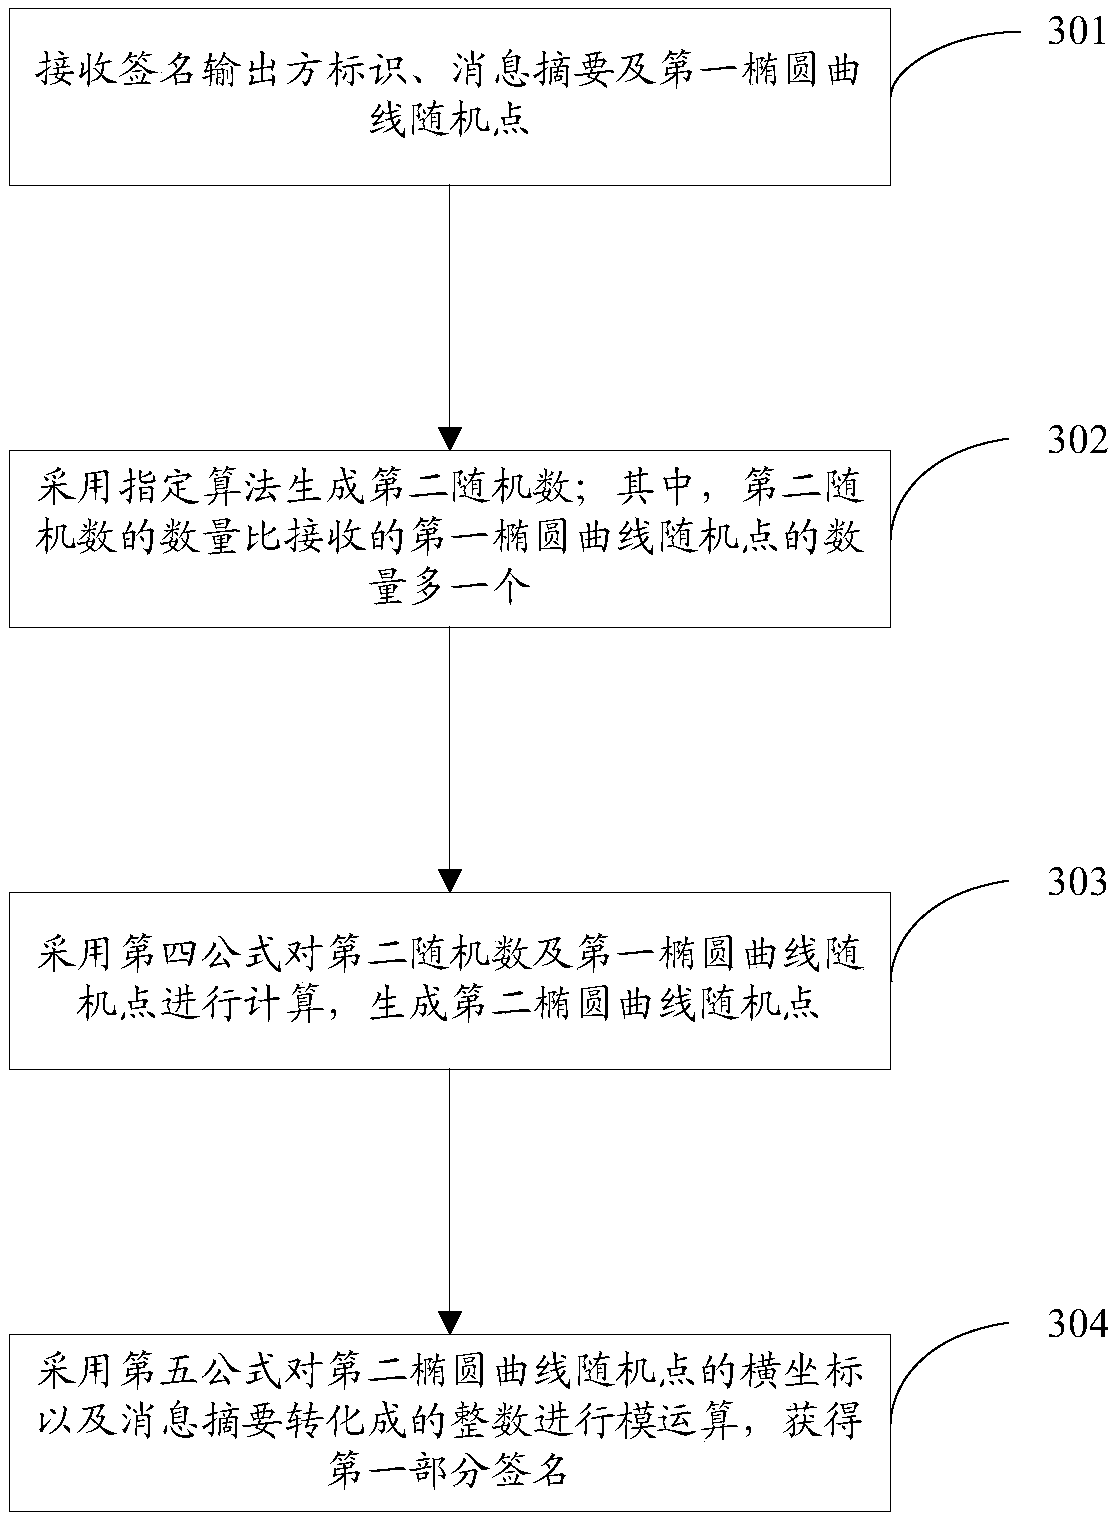 Signature method and device for generating SM2 algorithm through mutual coordination, and storage medium